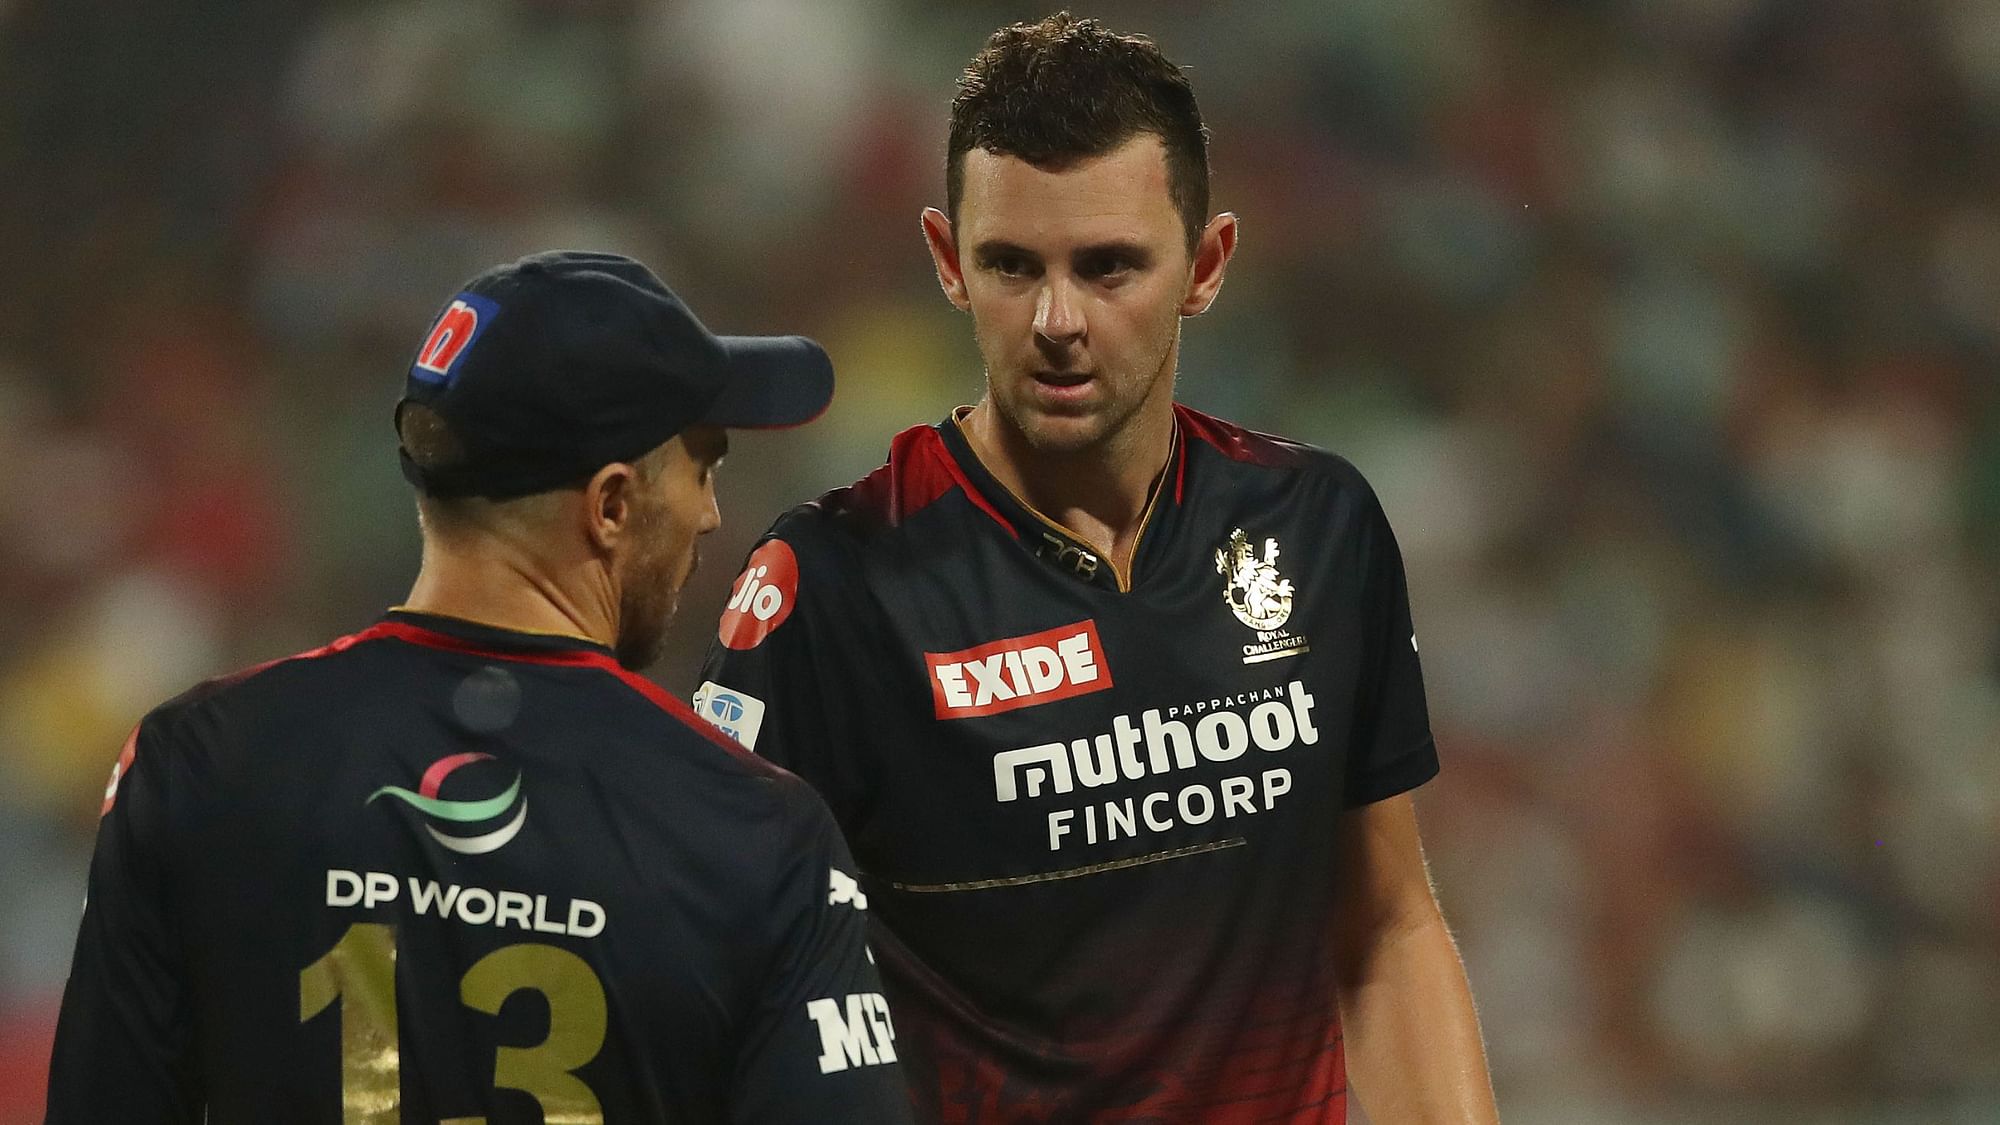 <div class="paragraphs"><p>Royal Challengers Bangalore (RCB) have been dealt two big injury setbacks with pacer Josh Hazlewood and Glenn Maxwell expected to miss the franchises's first few matches due to injuries.</p></div>